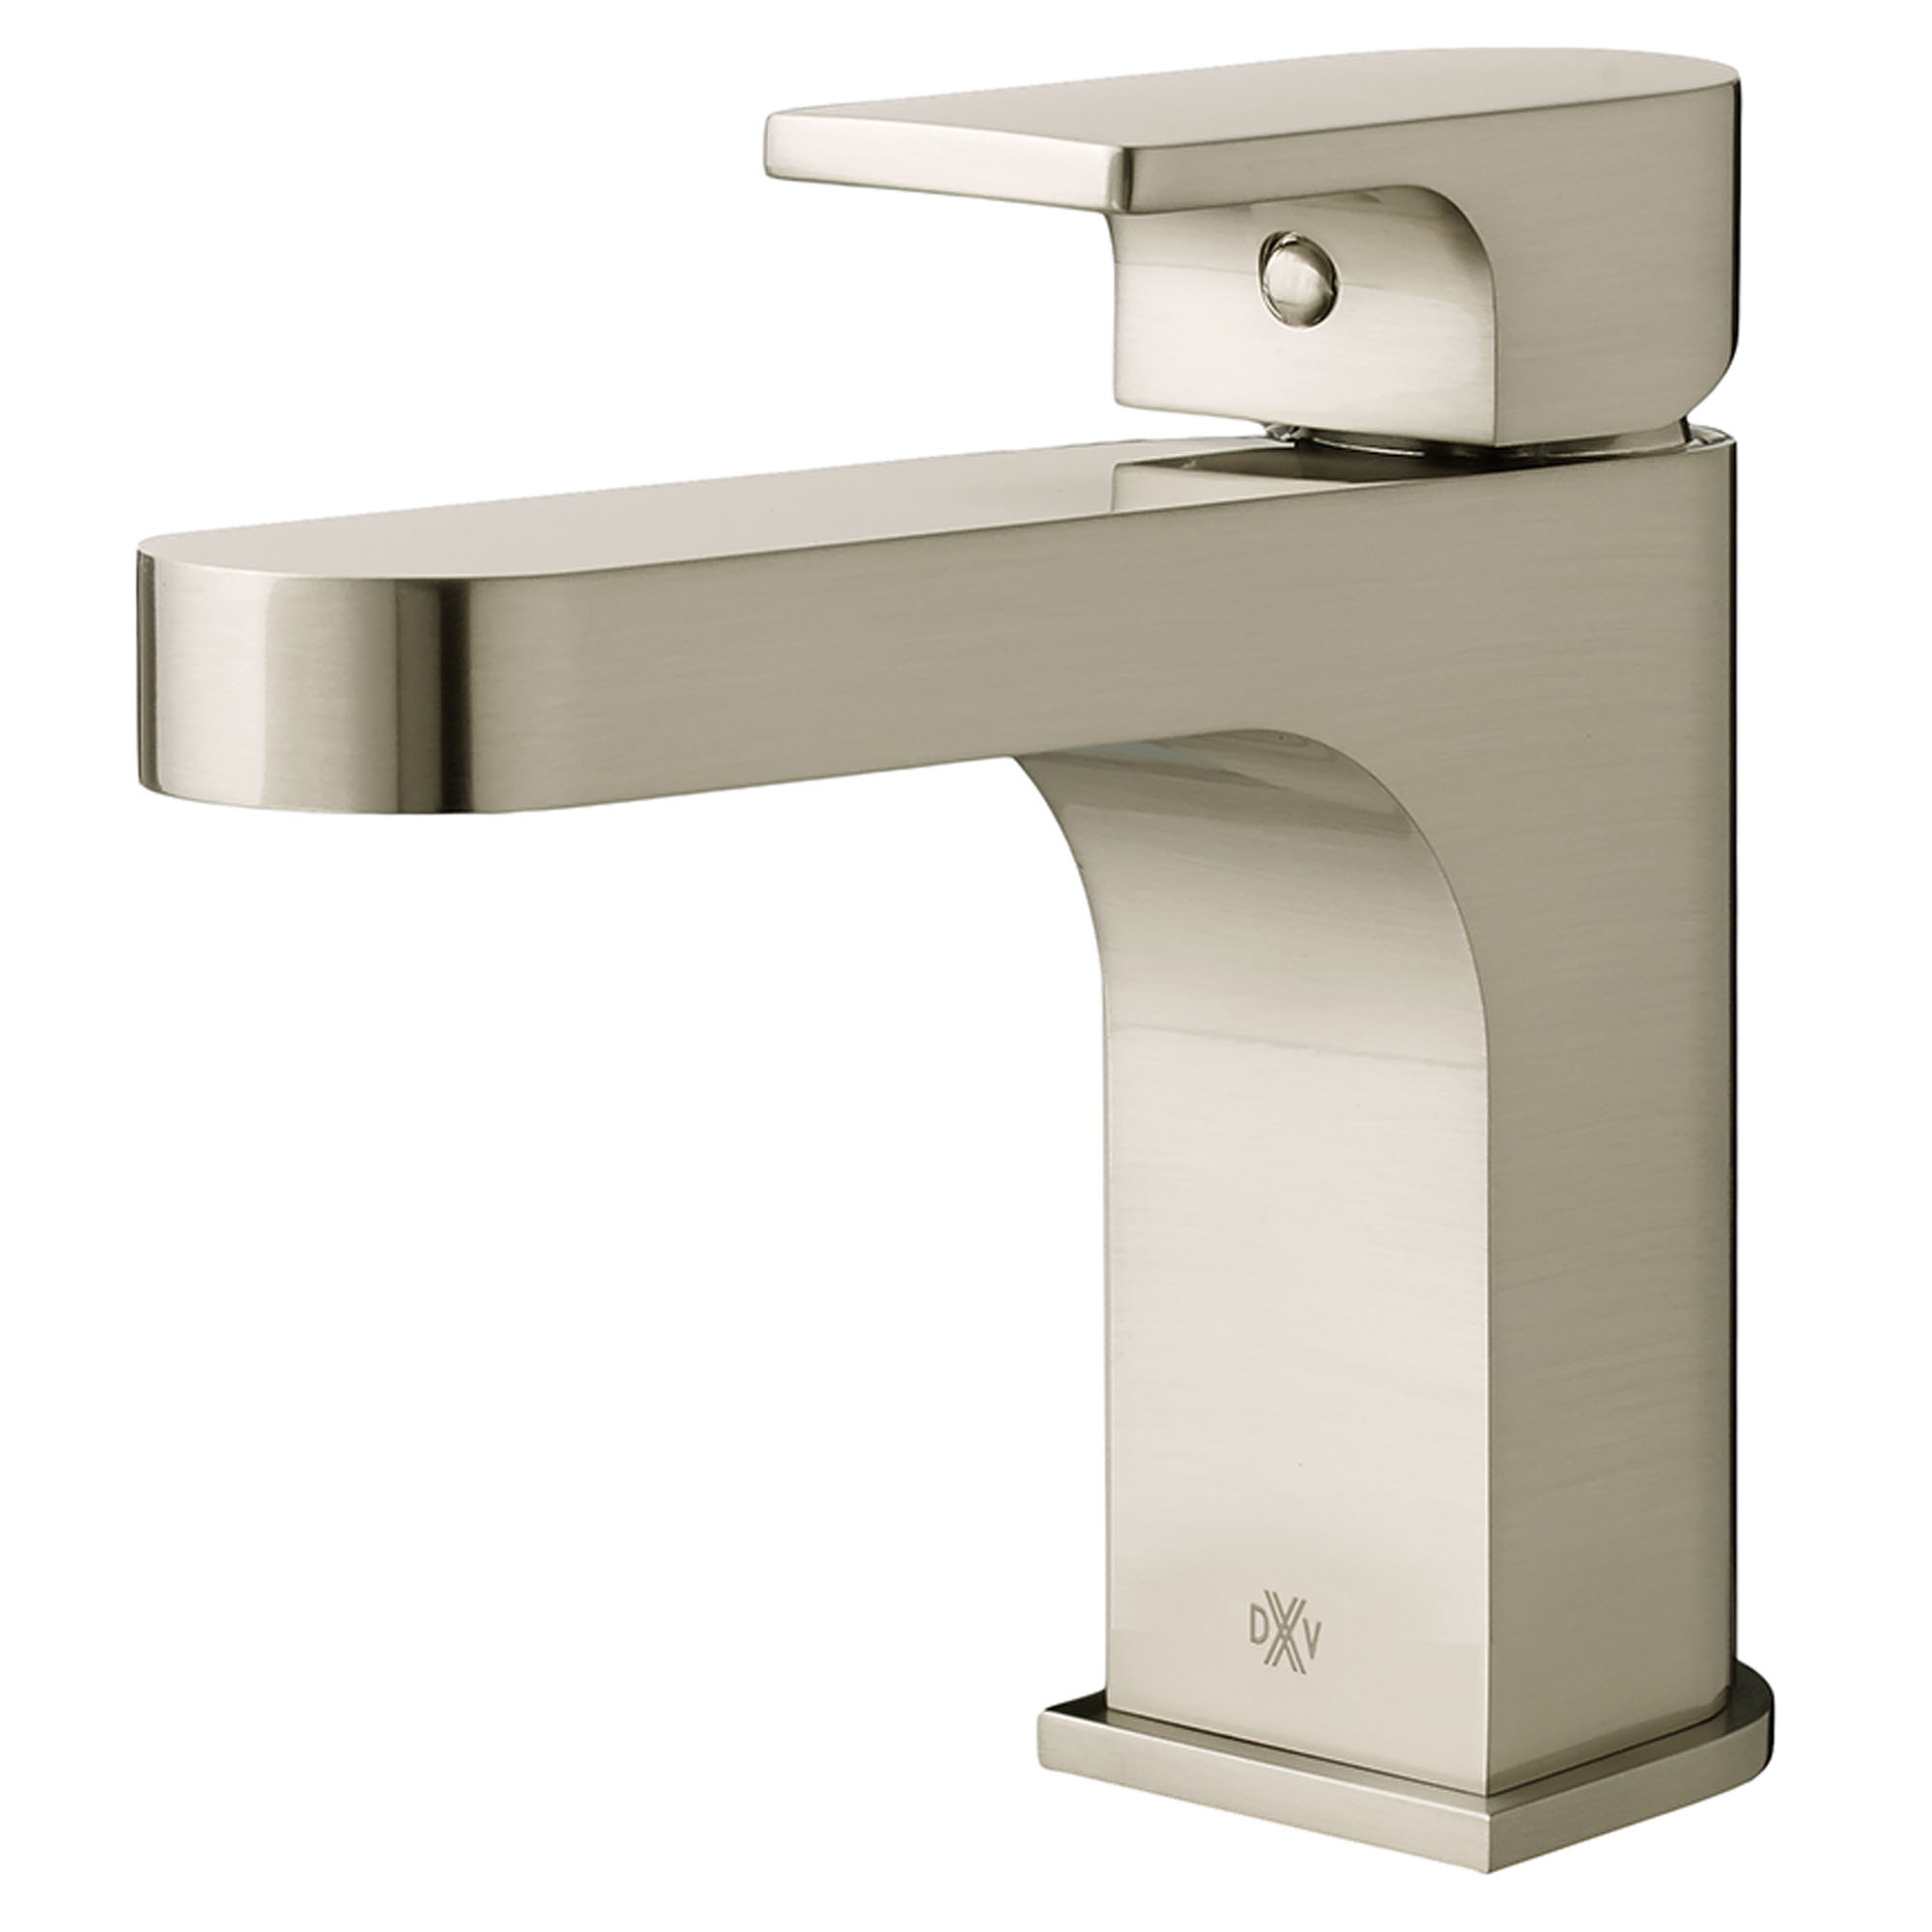 Equility Single Handle Bathroom Faucet with Lever Handle